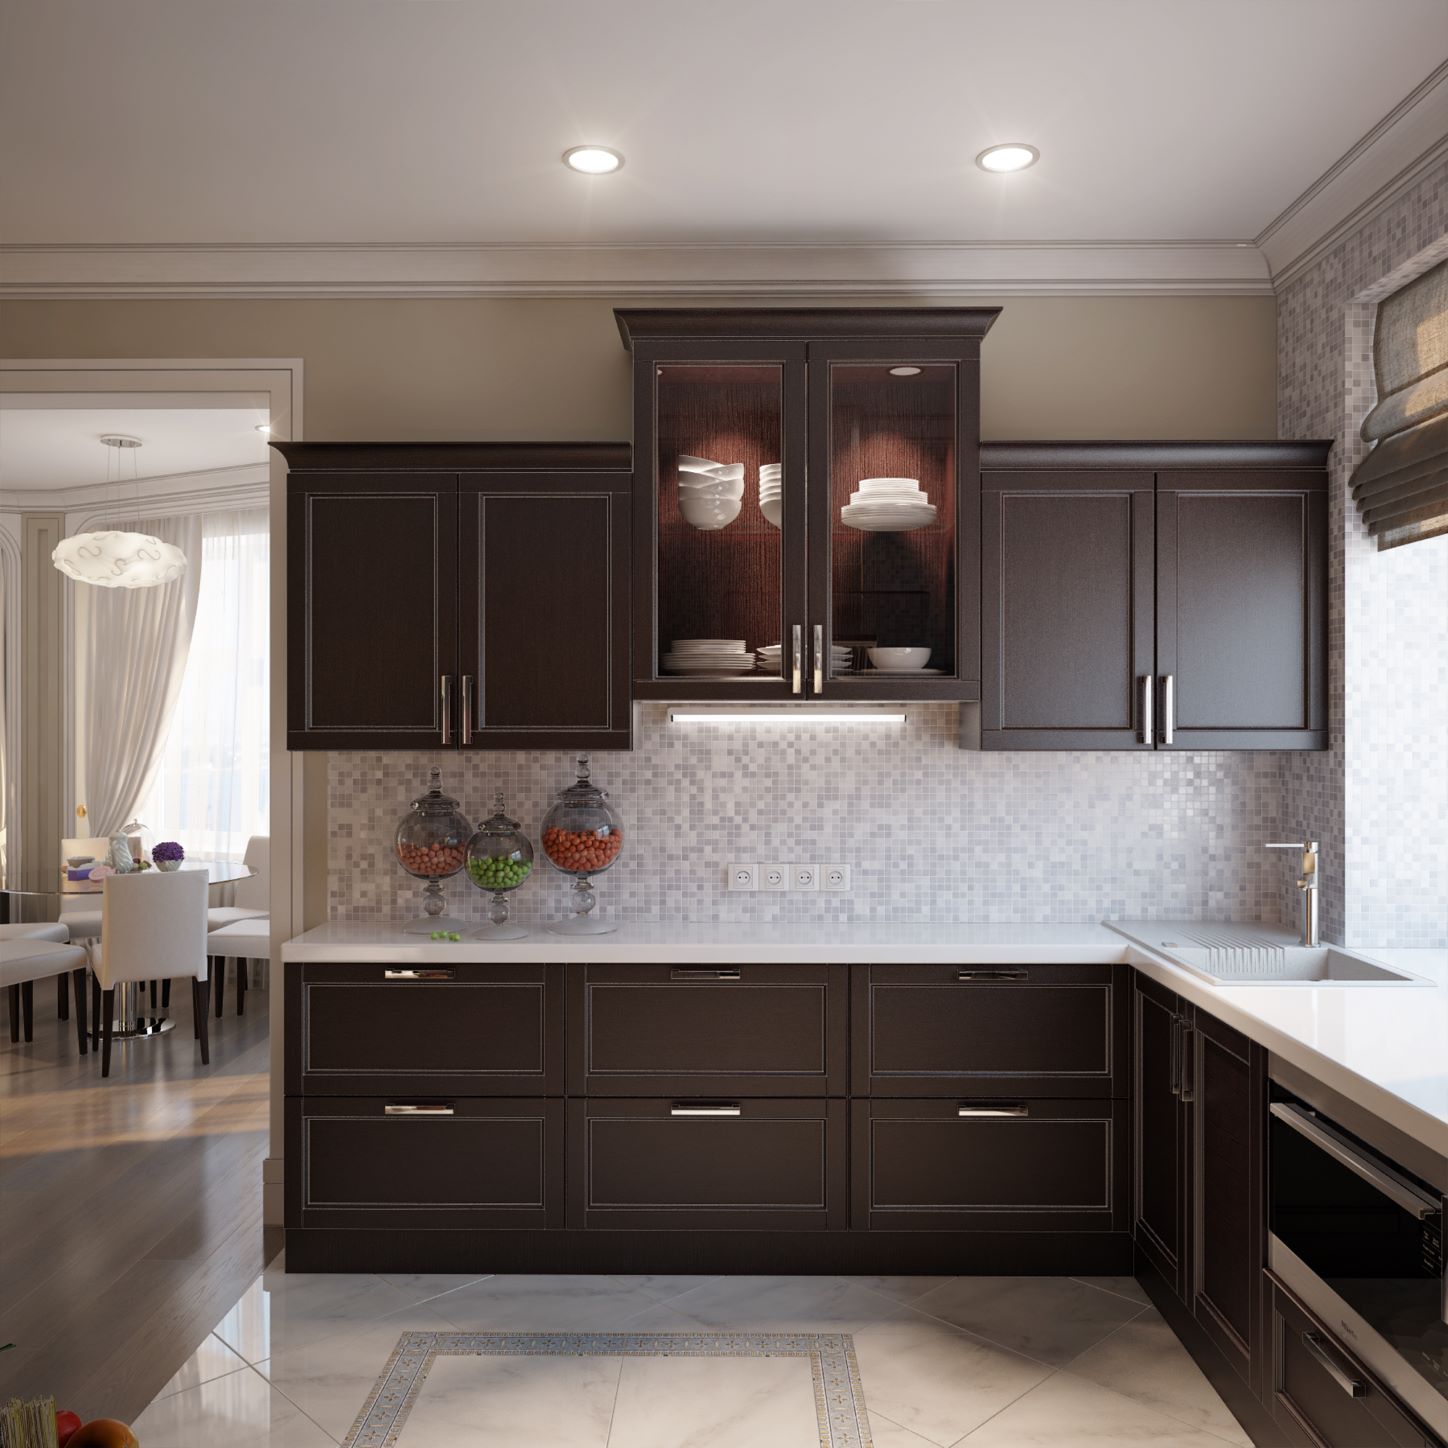 3 Complimentary Paint Ideas For Dark Kitchen Cabinets 